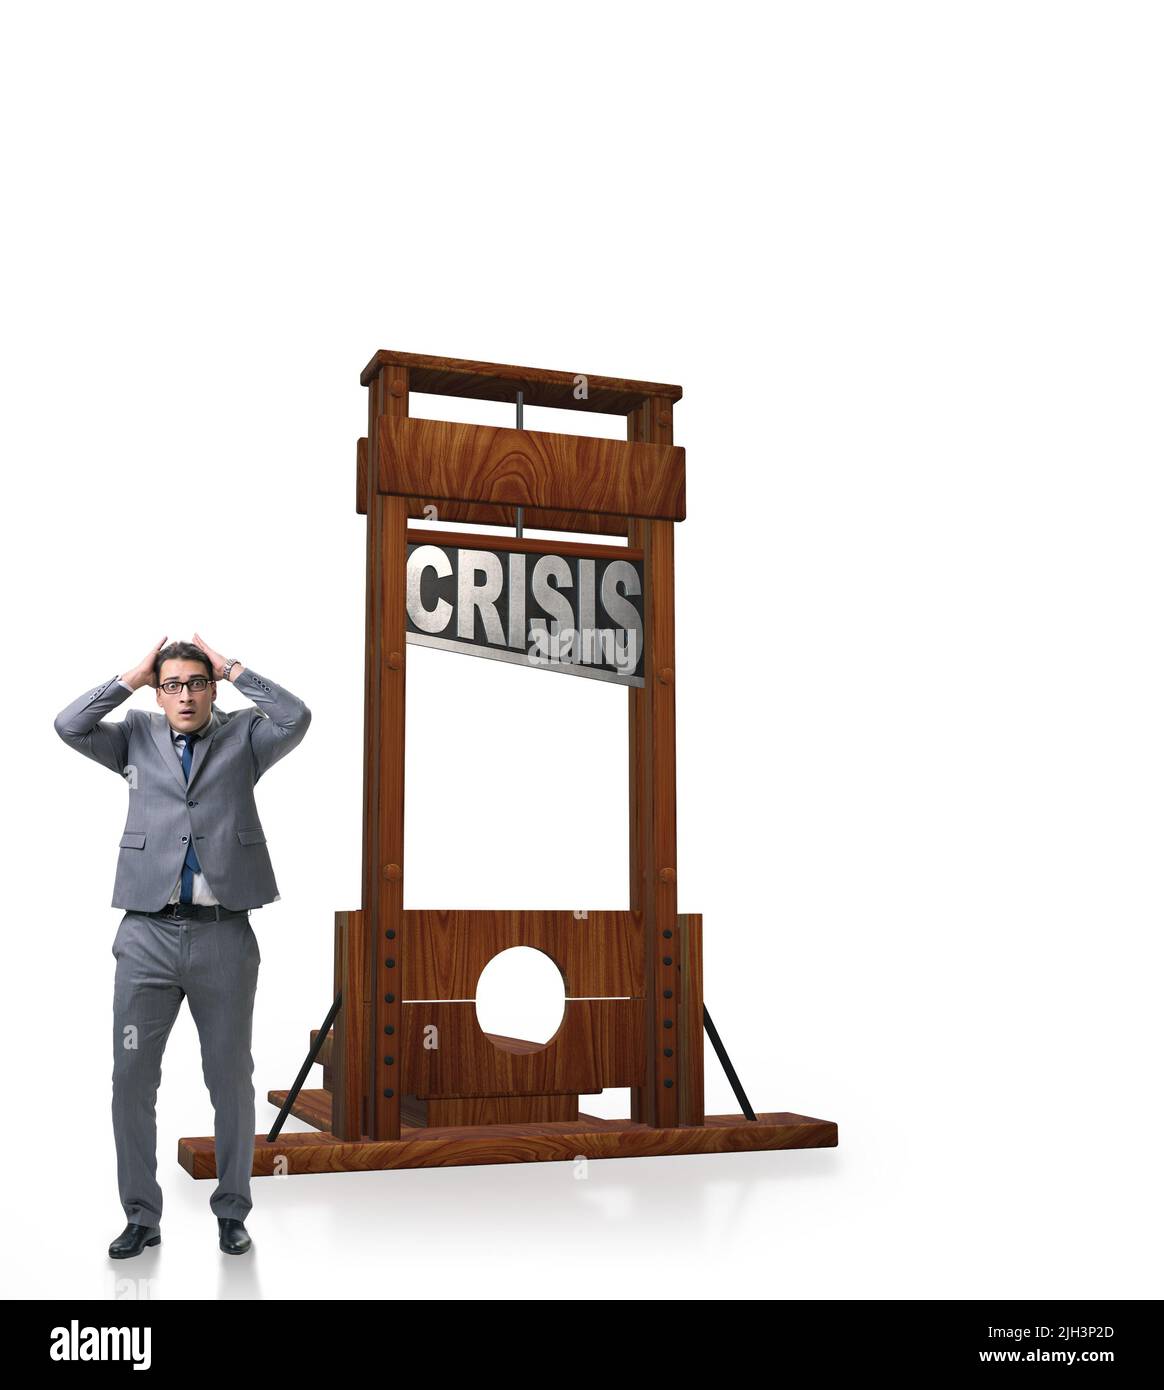 The businessman in crisis business concept Stock Photo